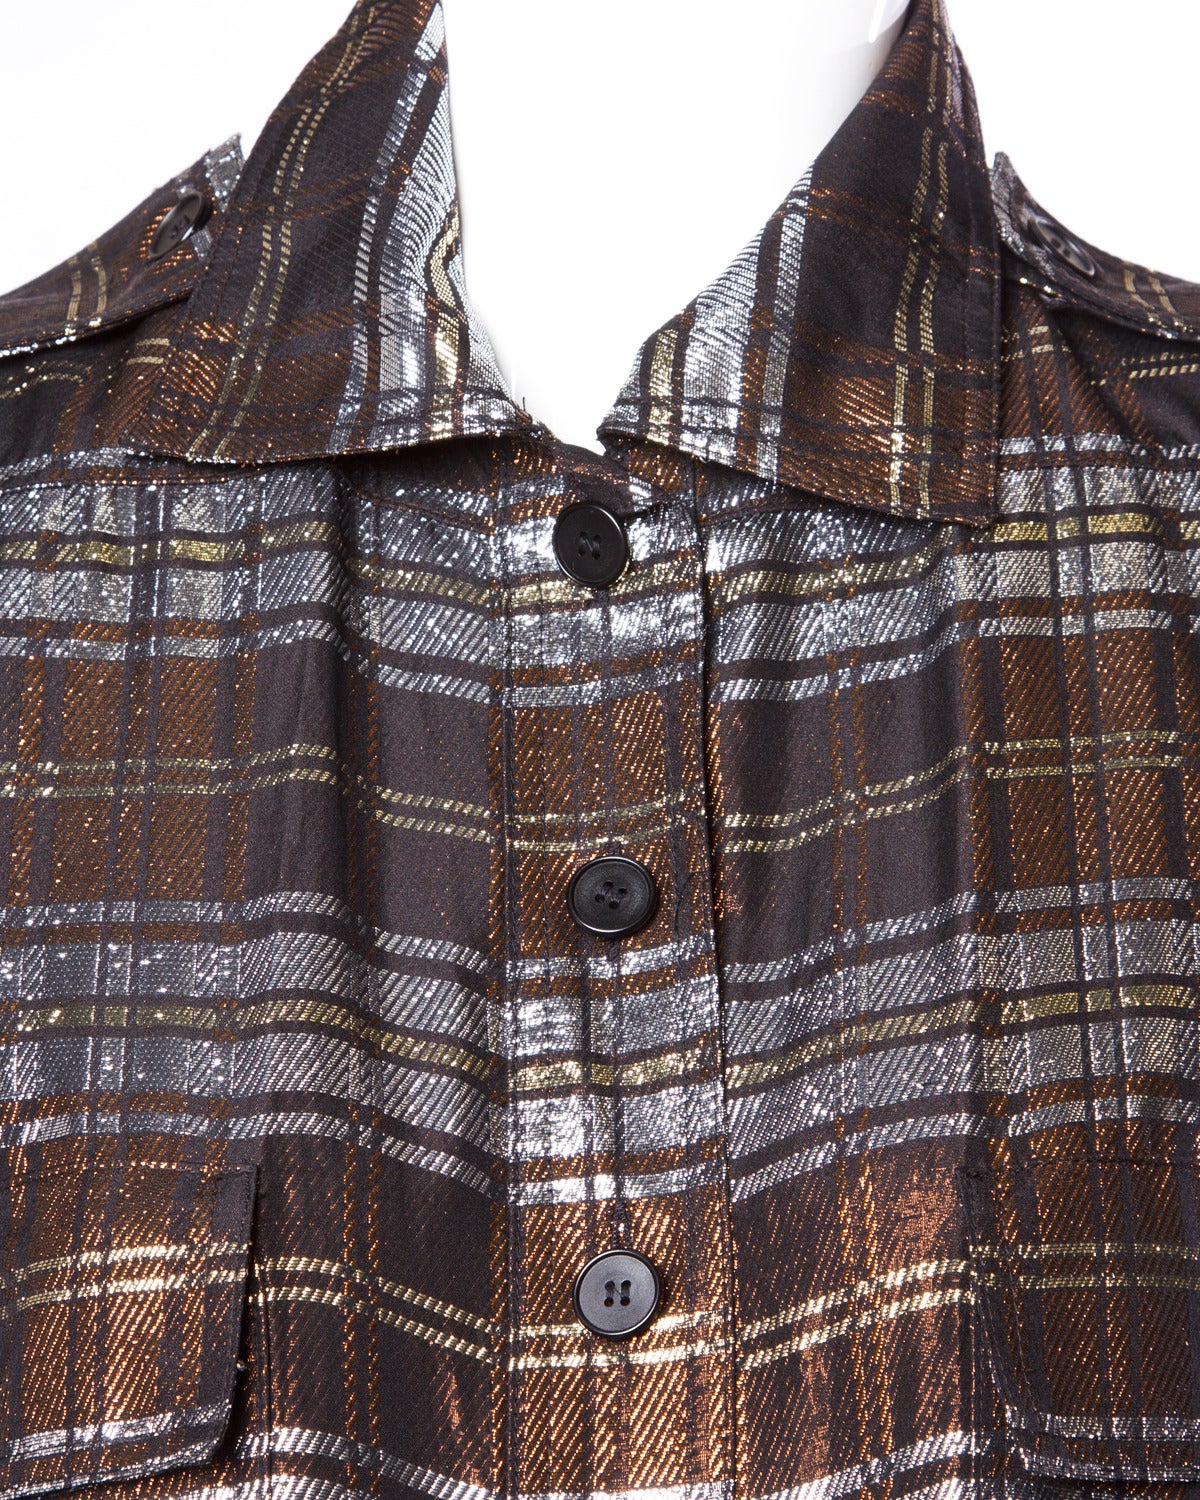 Fantastic vintage metallic plaid shirt dress by Jean Louis Scherrer for the famous Beverly Hills Boutique Giorgio. Long sleeves and front button closure.

Details:

Fully Lined in Silk
Metallic Plaid
Shoulder Pads are Sewn Into the